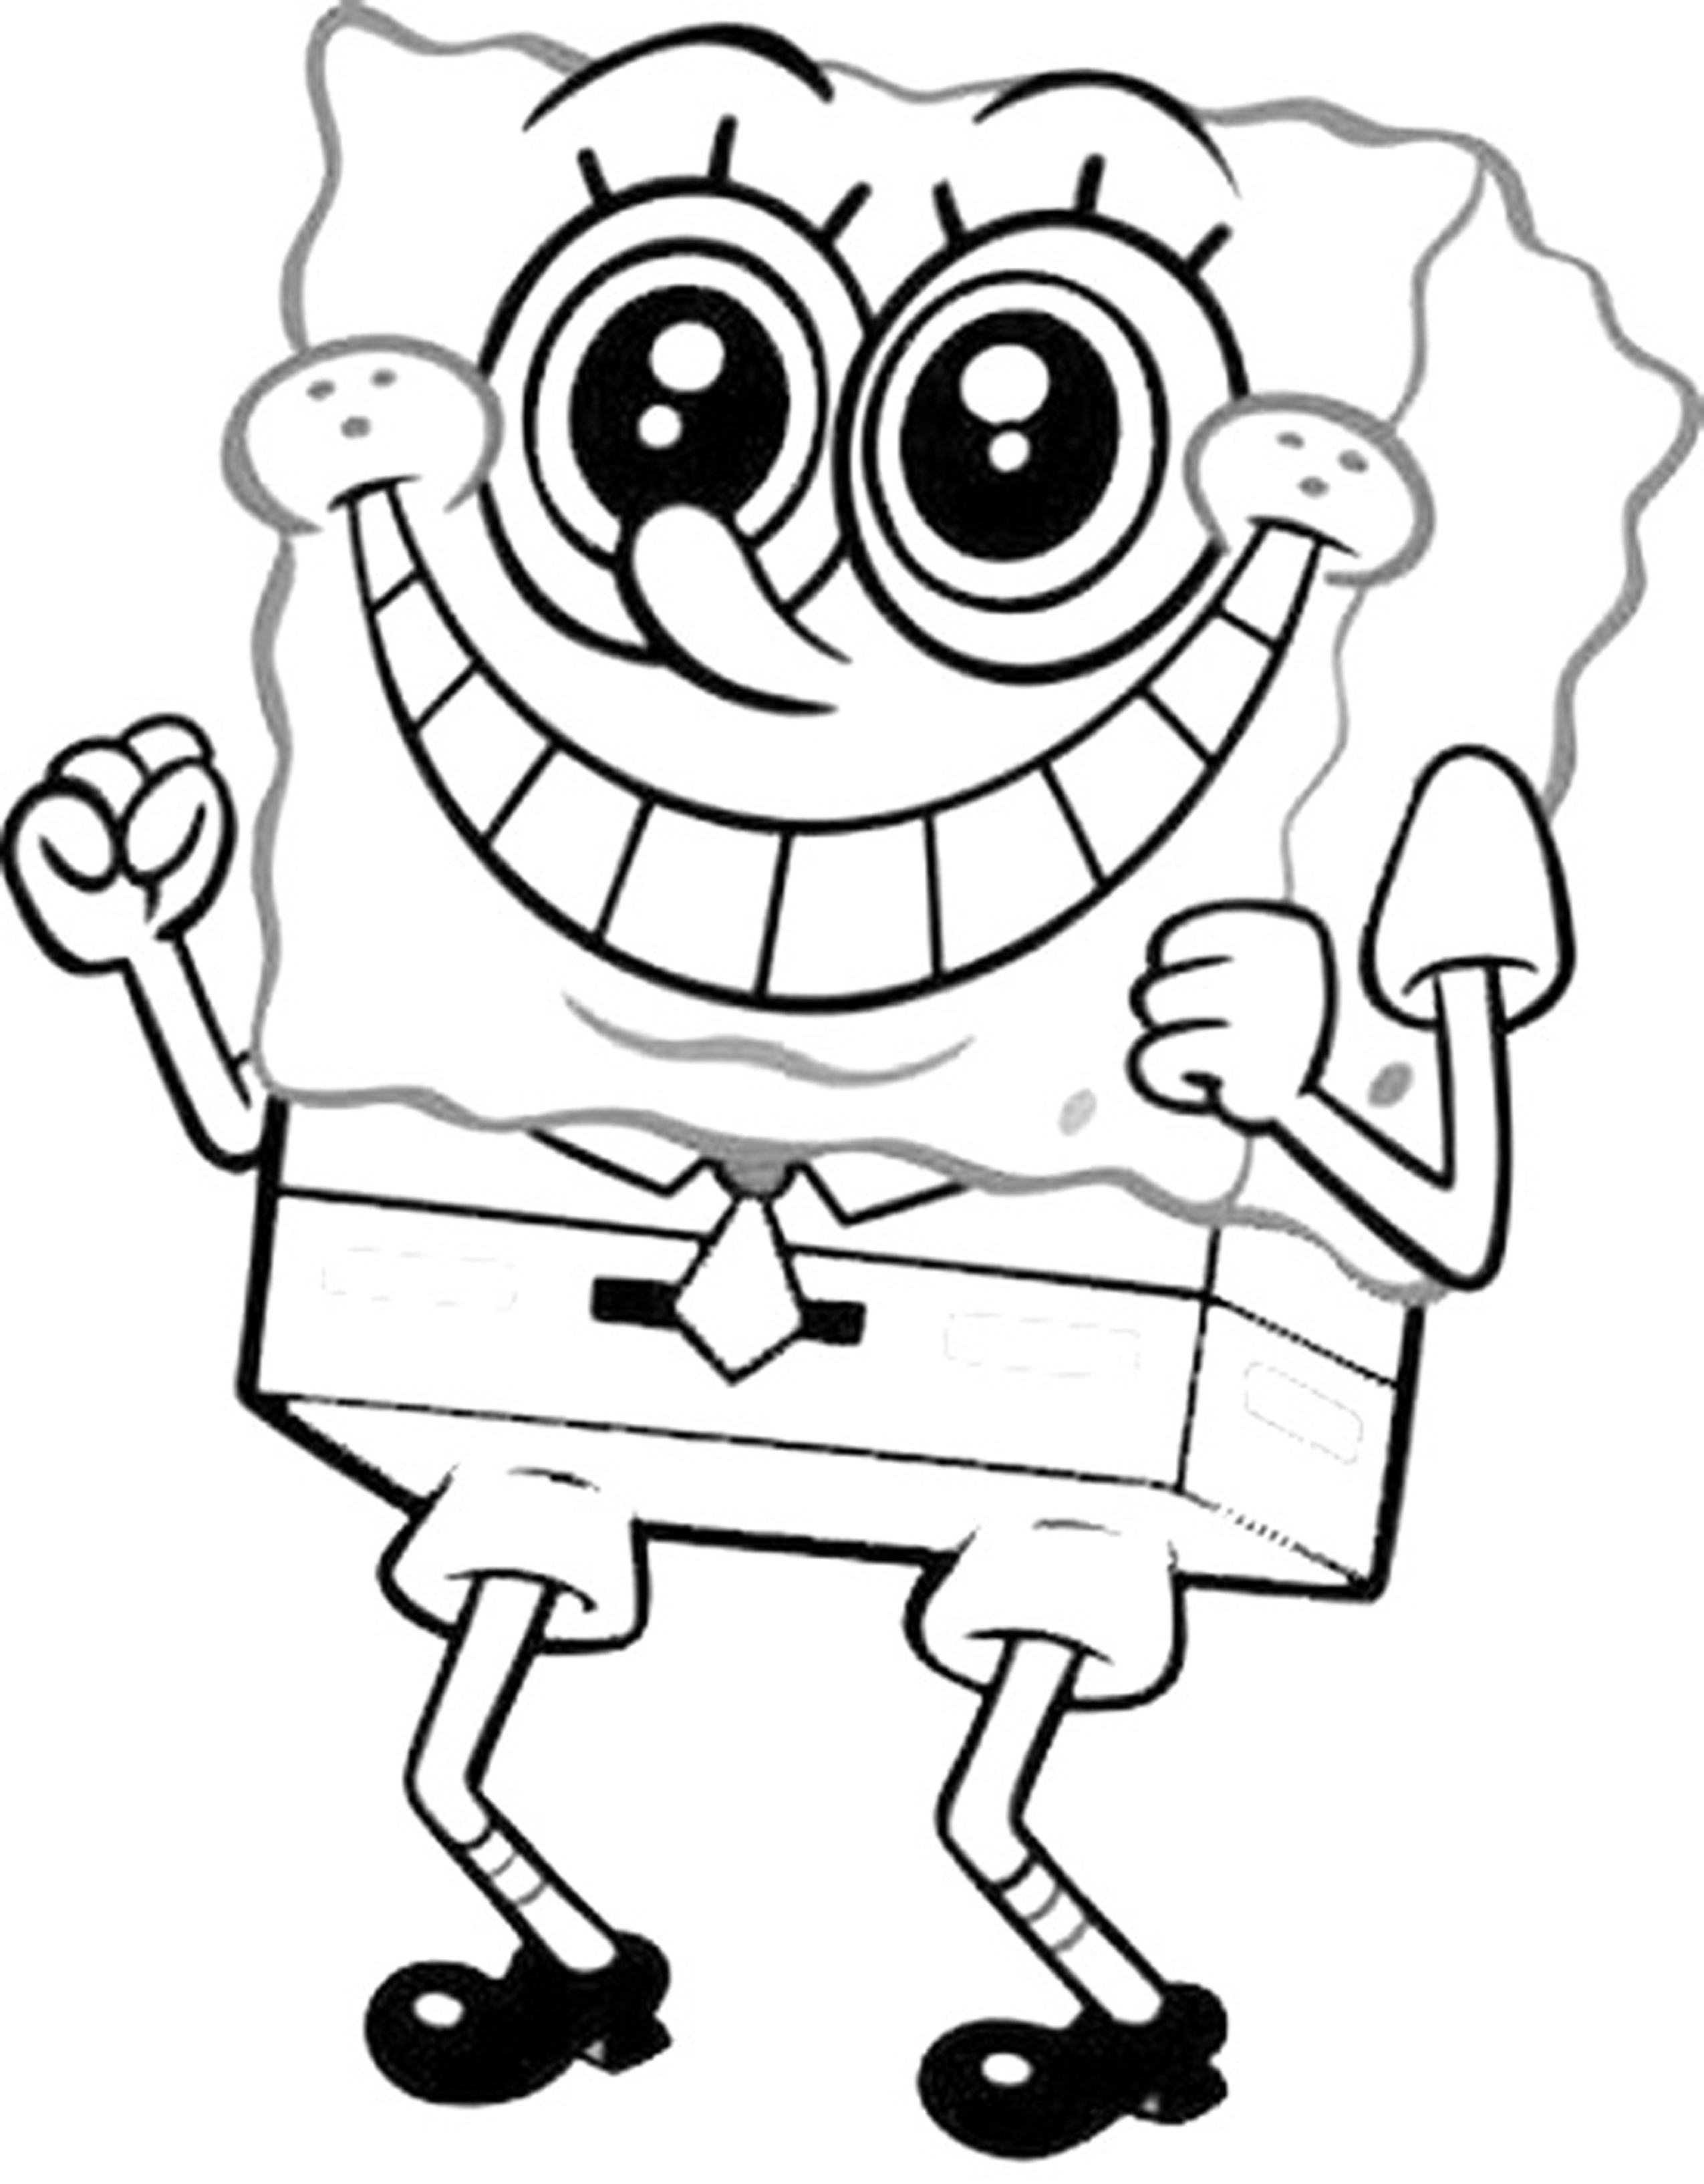 Perfect Coloring Pages Spongebob 19 With Additional Seasonal Colouring Pages with Coloring Pages Spongebob